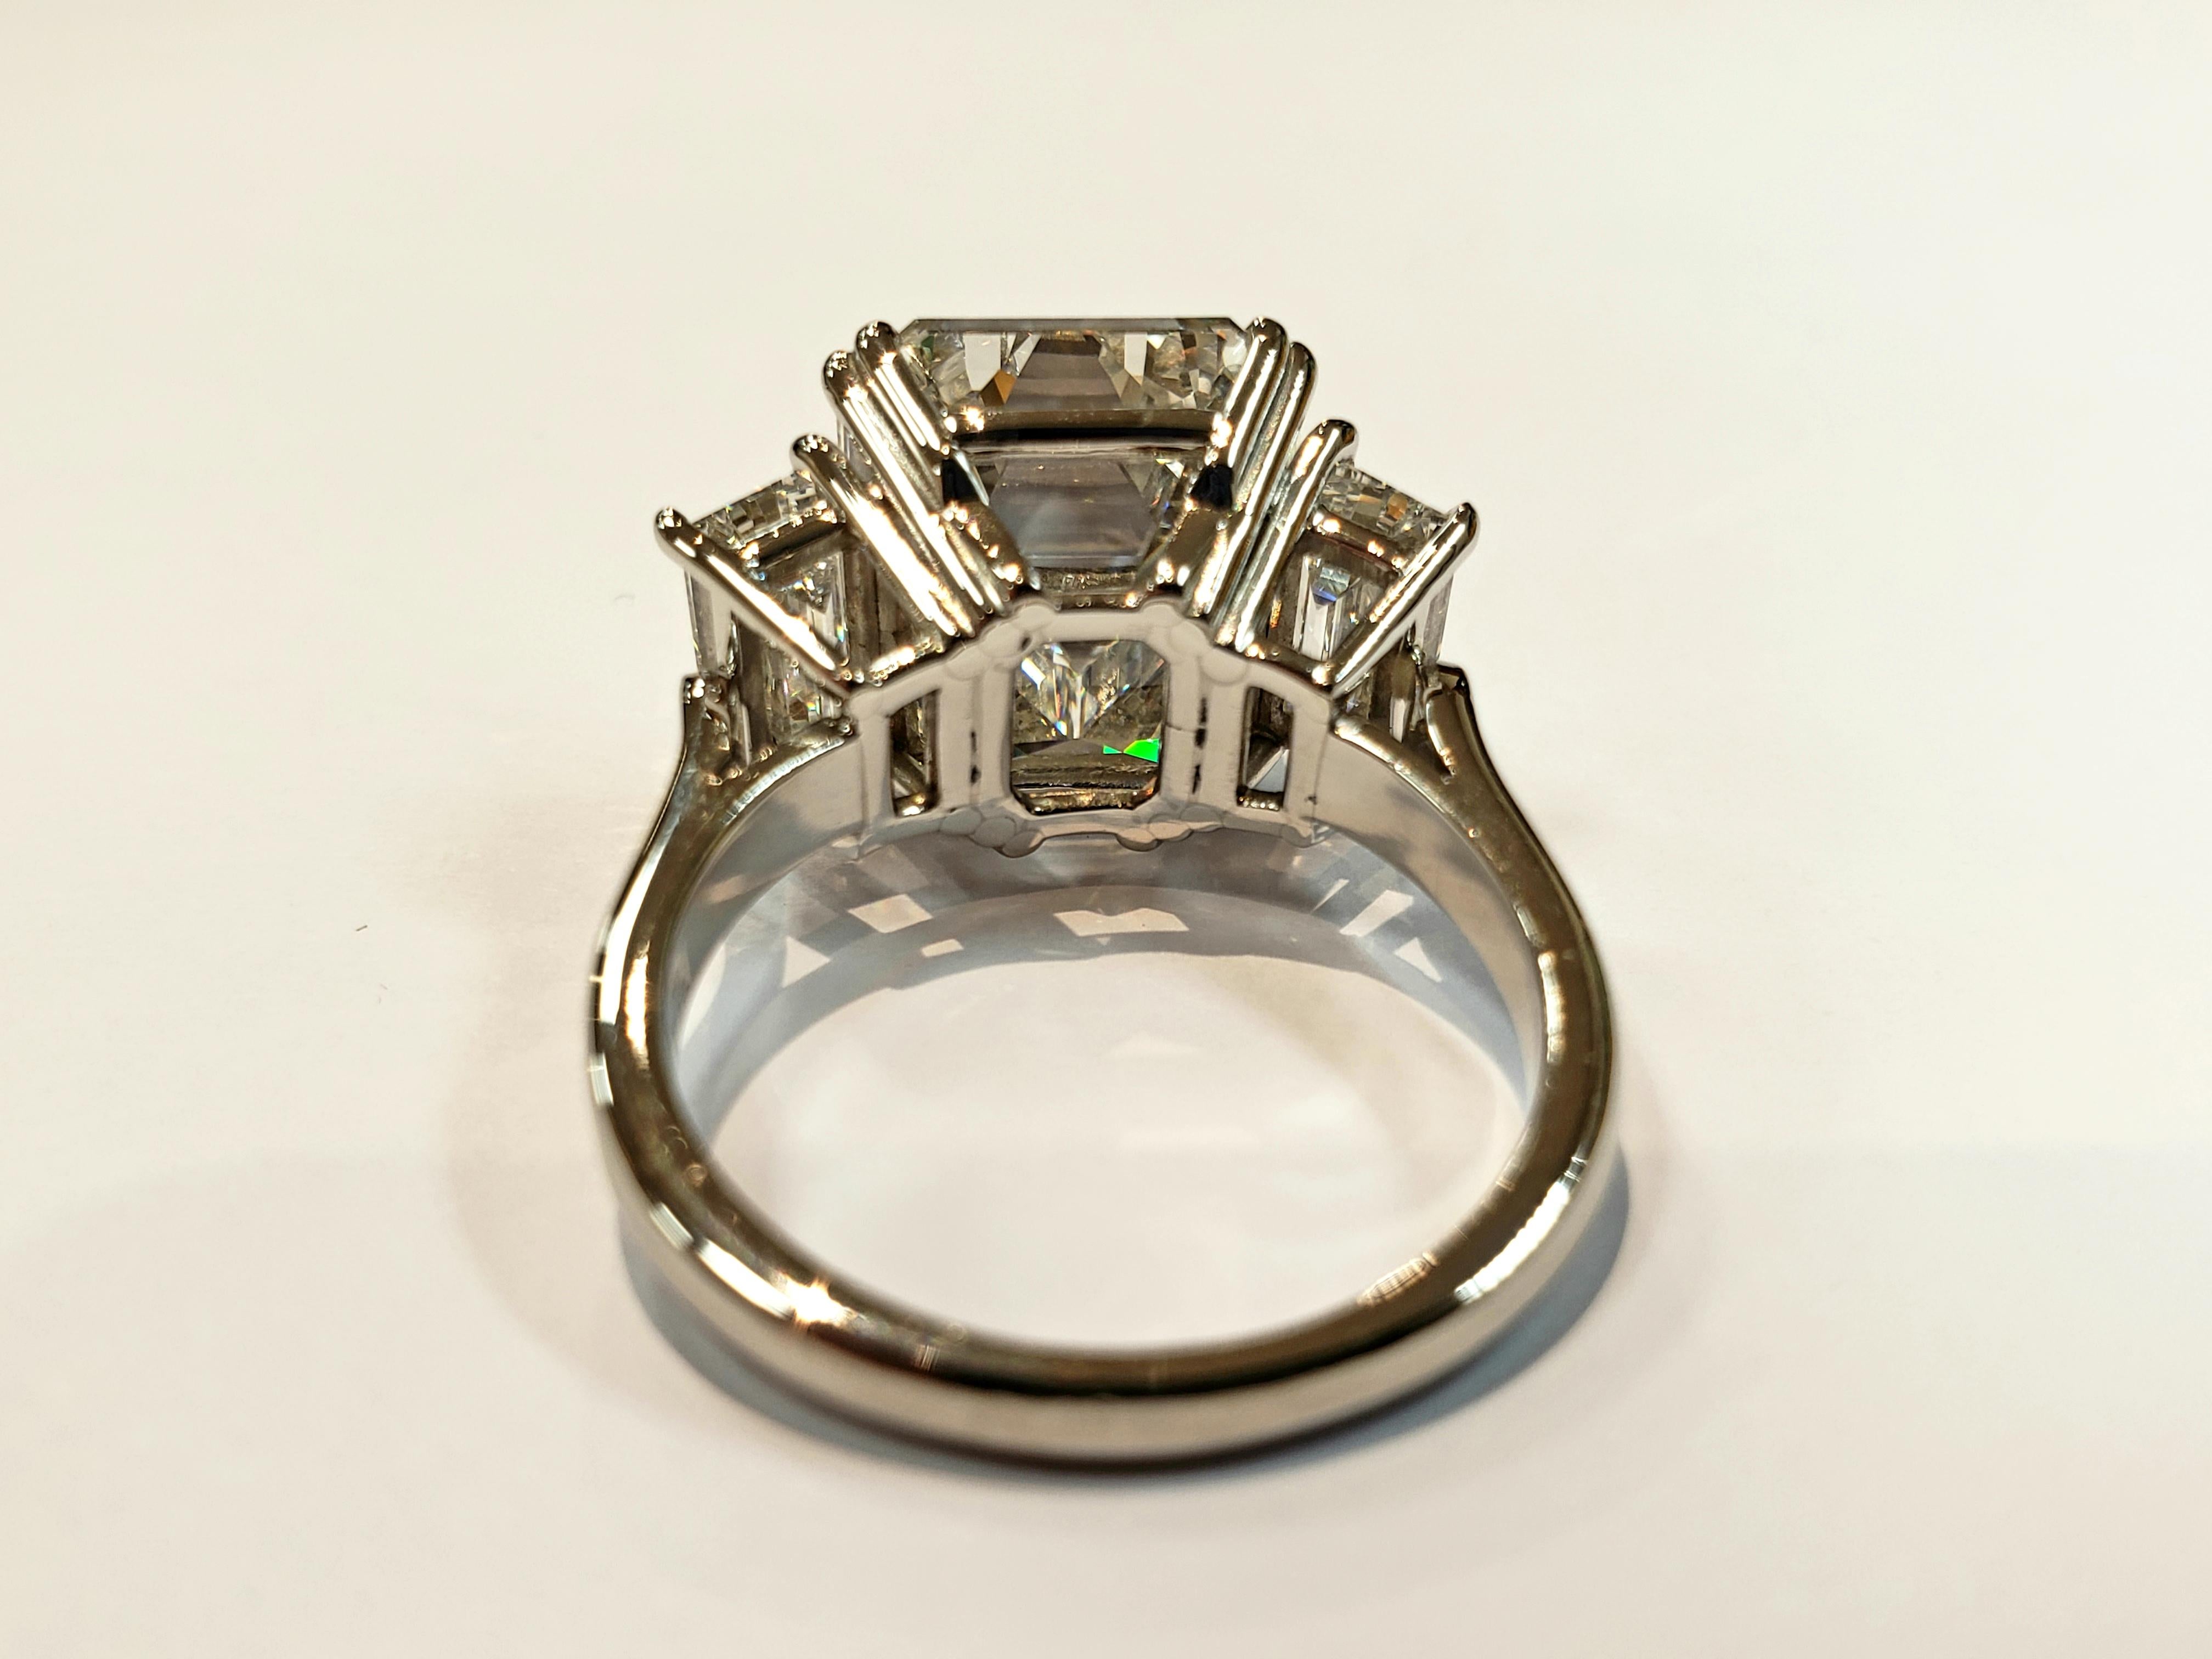 GIA Certified 10.29 Carat Emerald Cut Diamond Ring with Side Stones I/VS1 In Excellent Condition For Sale In Red Bank, NJ